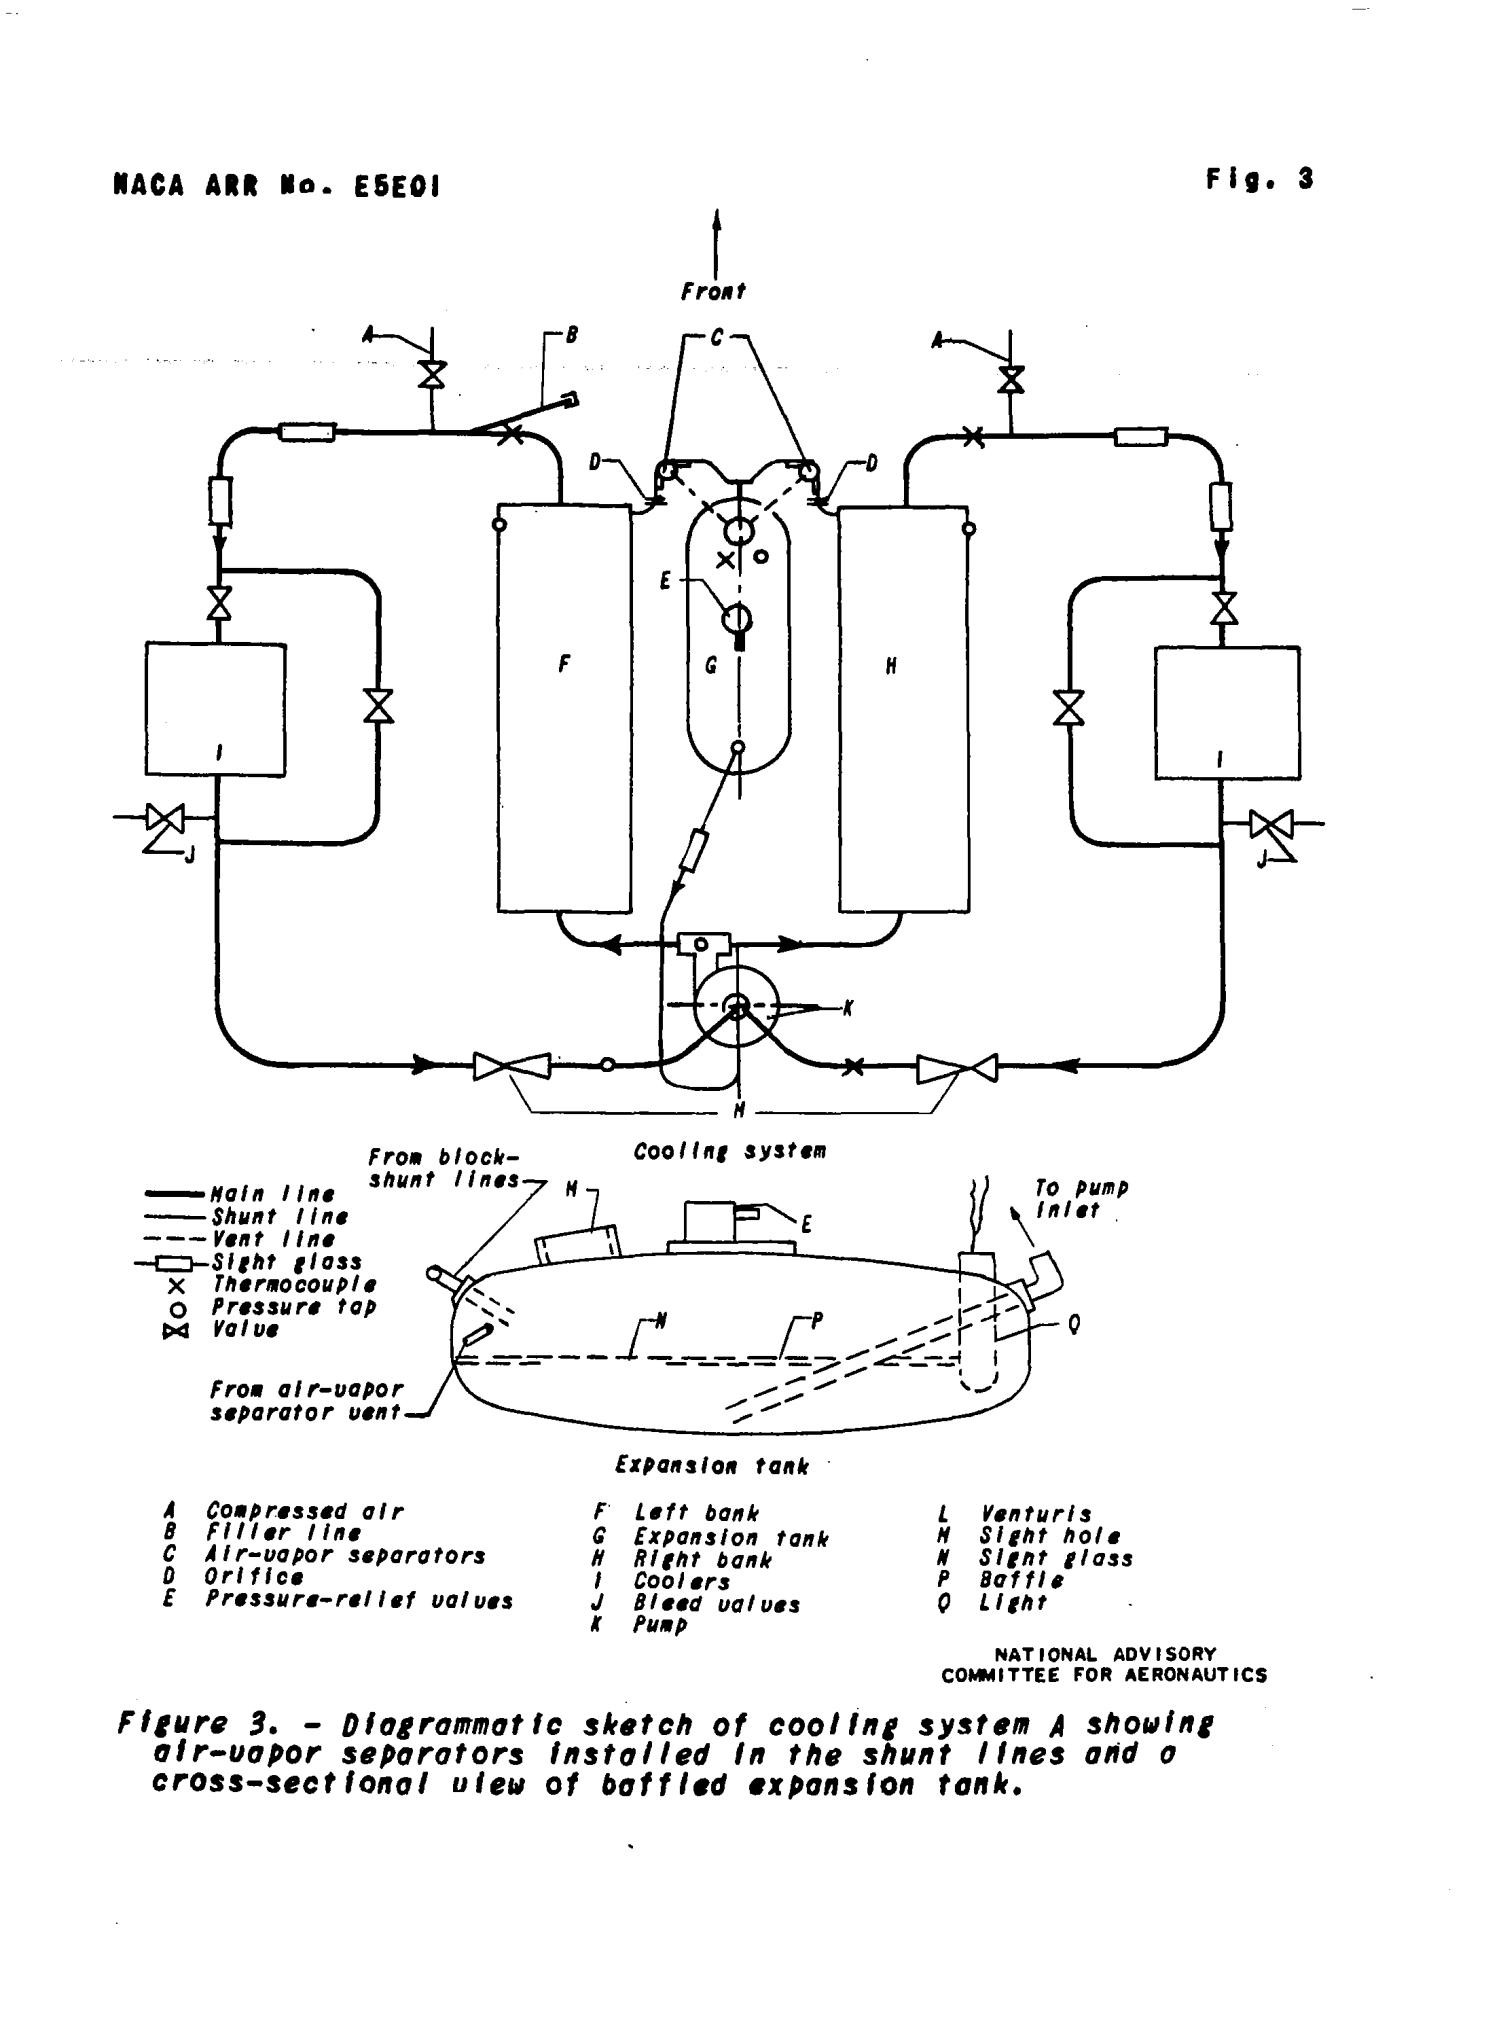 Engine Cooling System Diagram Engine Tests Of Pressurized Shunt Type Cooling Systems for A Liquid Of Engine Cooling System Diagram